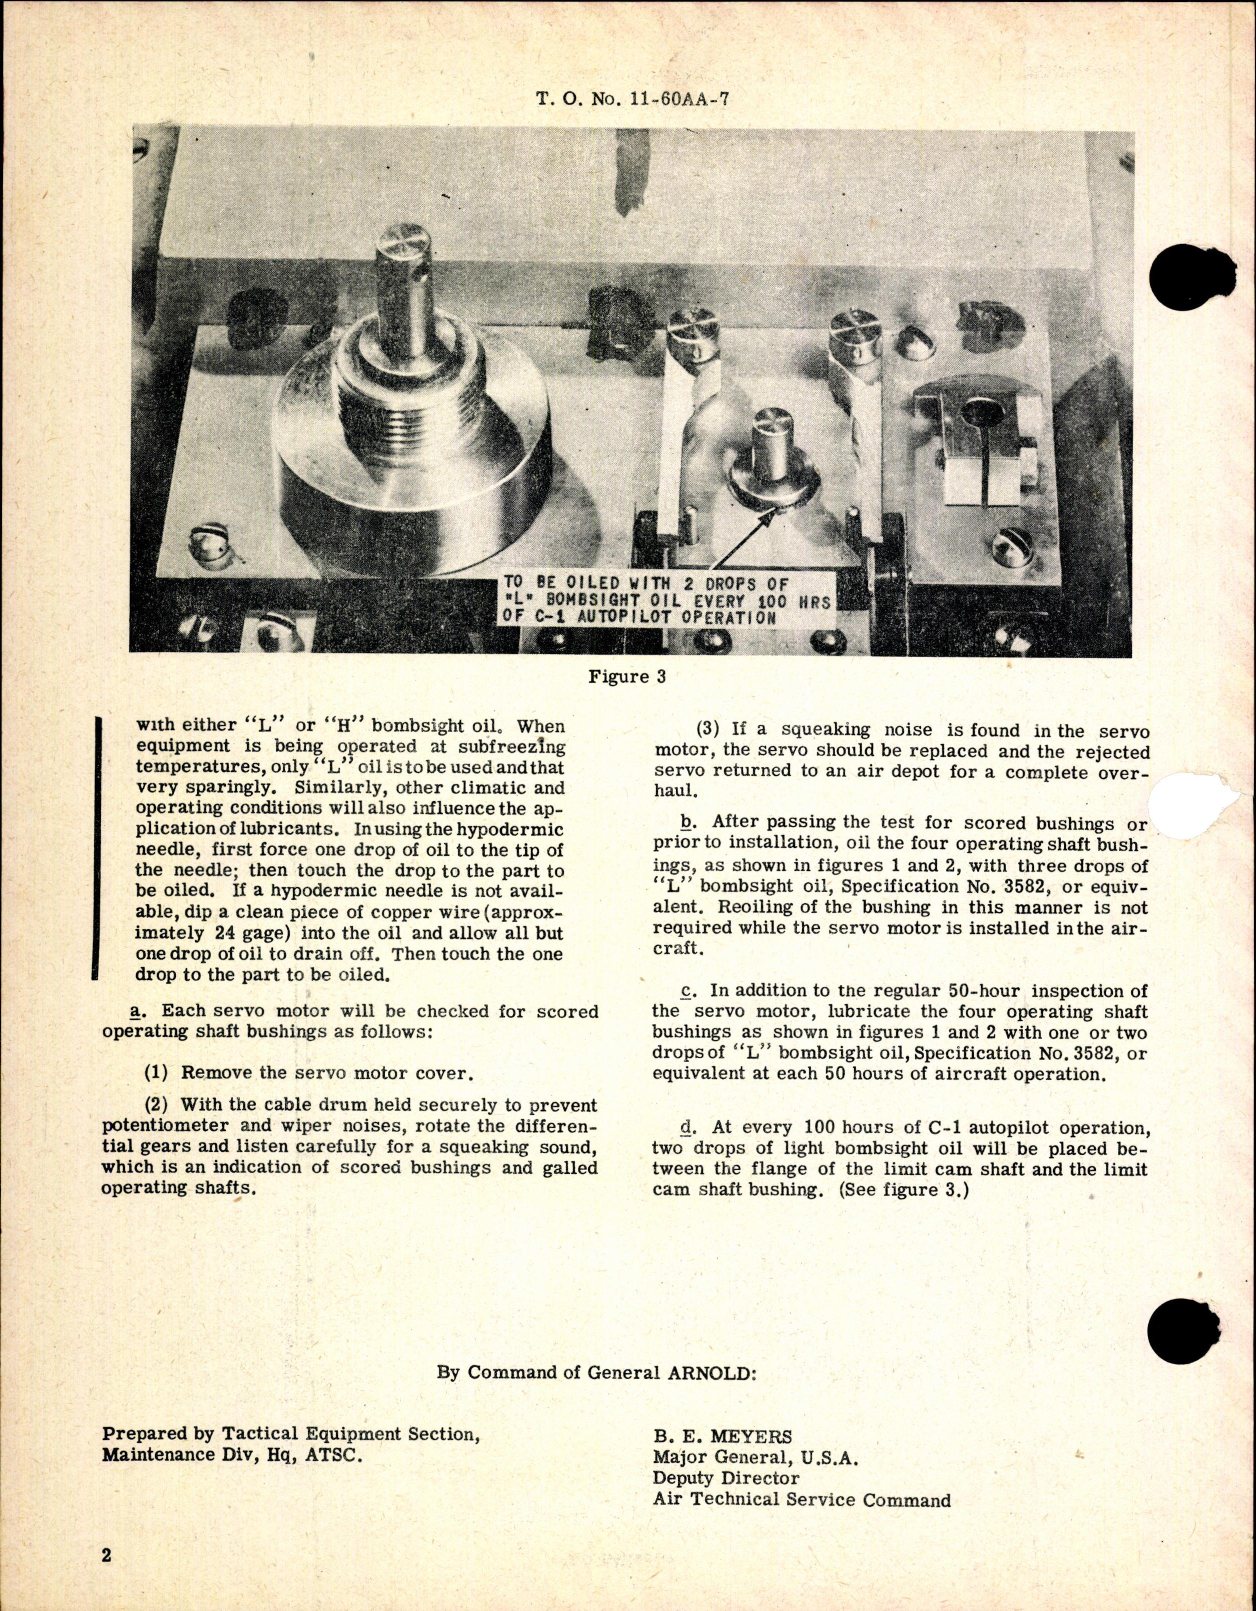 Sample page 2 from AirCorps Library document: Special Care and Oiling of Type C-1 Autopilot Servo Motors